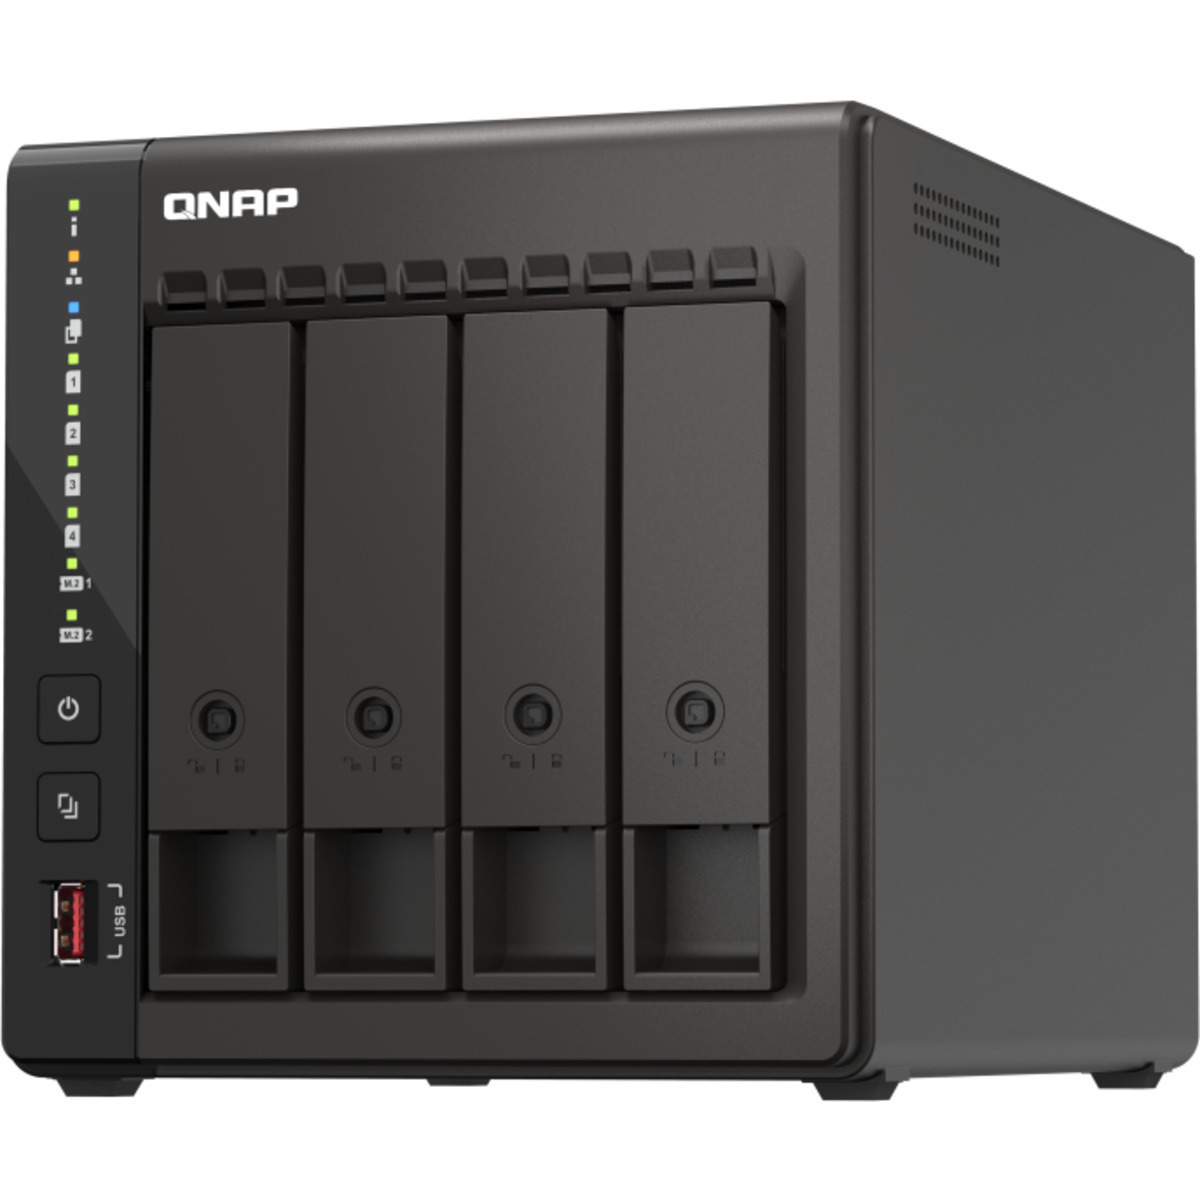 QNAP TS-453E 32tb 4-Bay Desktop Multimedia / Power User / Business NAS - Network Attached Storage Device 4x8tb Western Digital Red Pro WD8003FFBX 3.5 7200rpm SATA 6Gb/s HDD NAS Class Drives Installed - Burn-In Tested TS-453E